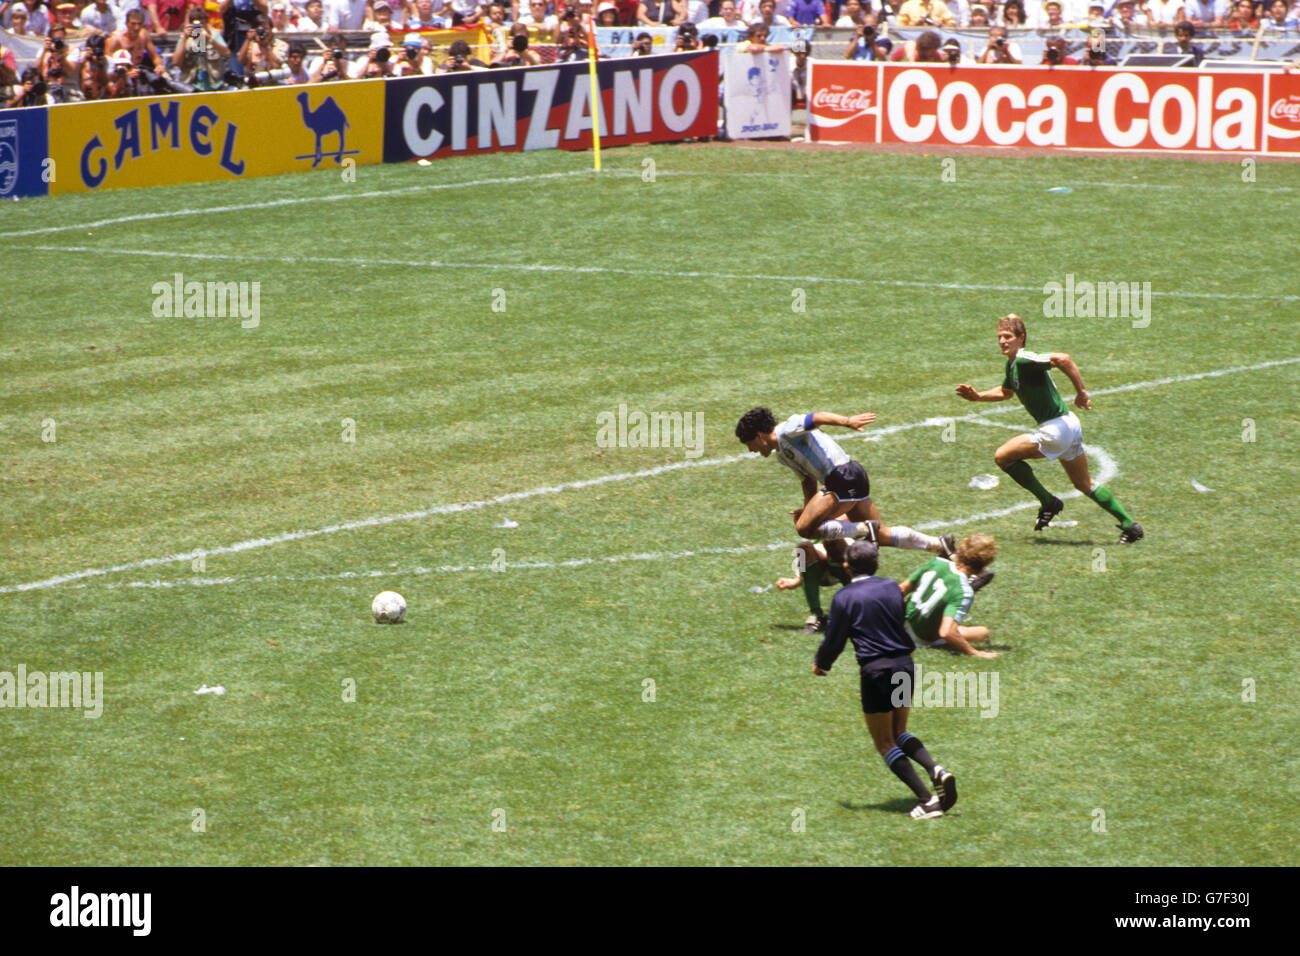 Sequence shot of Argentina's Diego Maradona being fouled by West Germany's Ditmar Jakobs (17) as he burst through on goal. Stock Photo